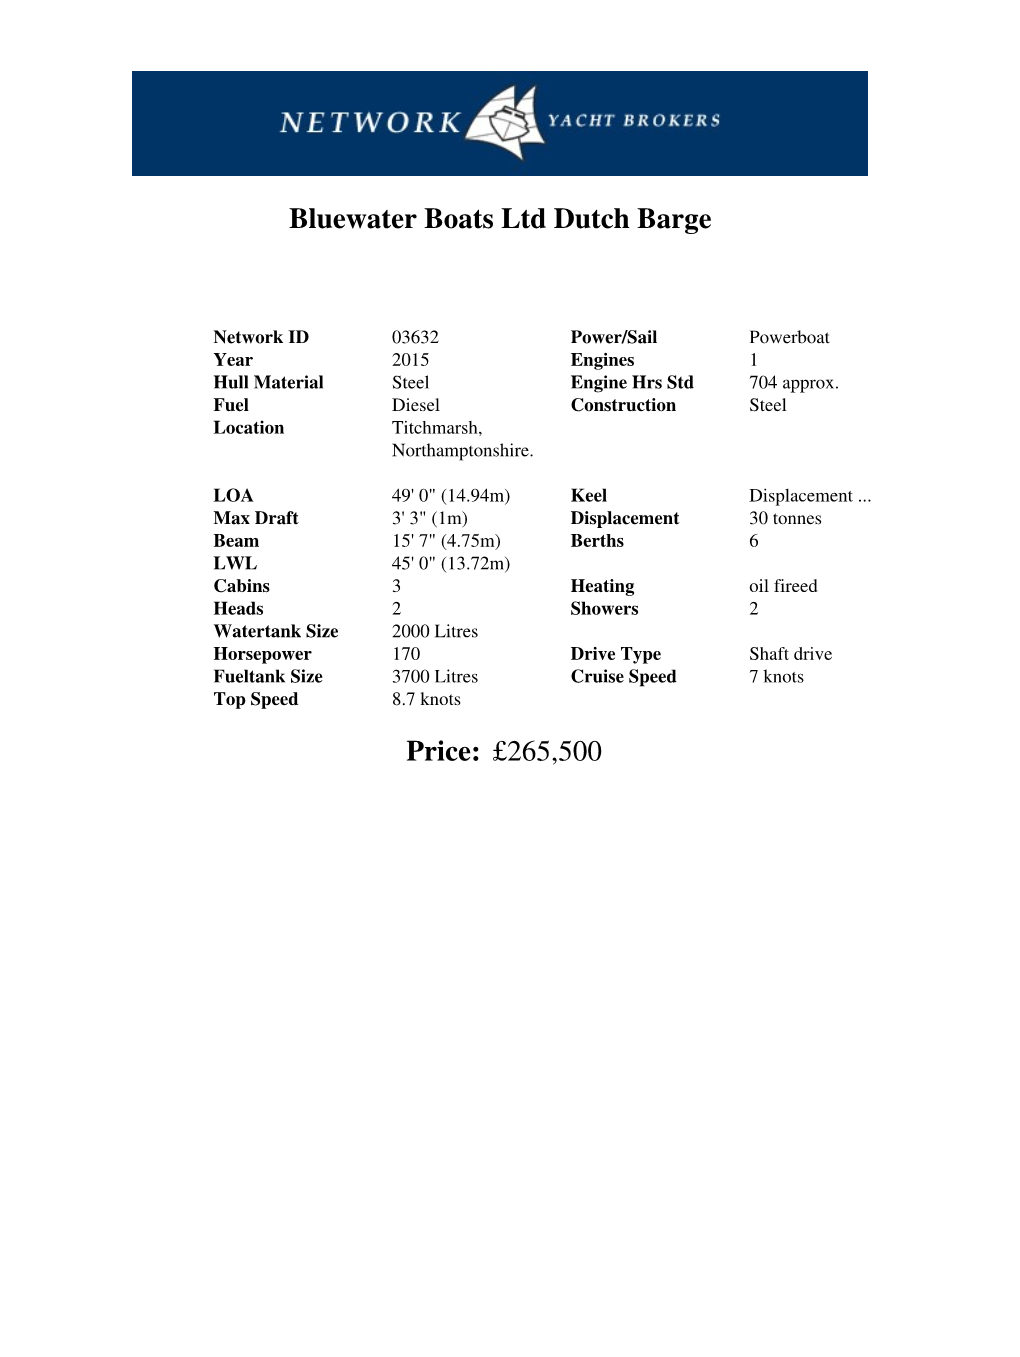 Bluewater Boats Ltd Dutch Barge Price